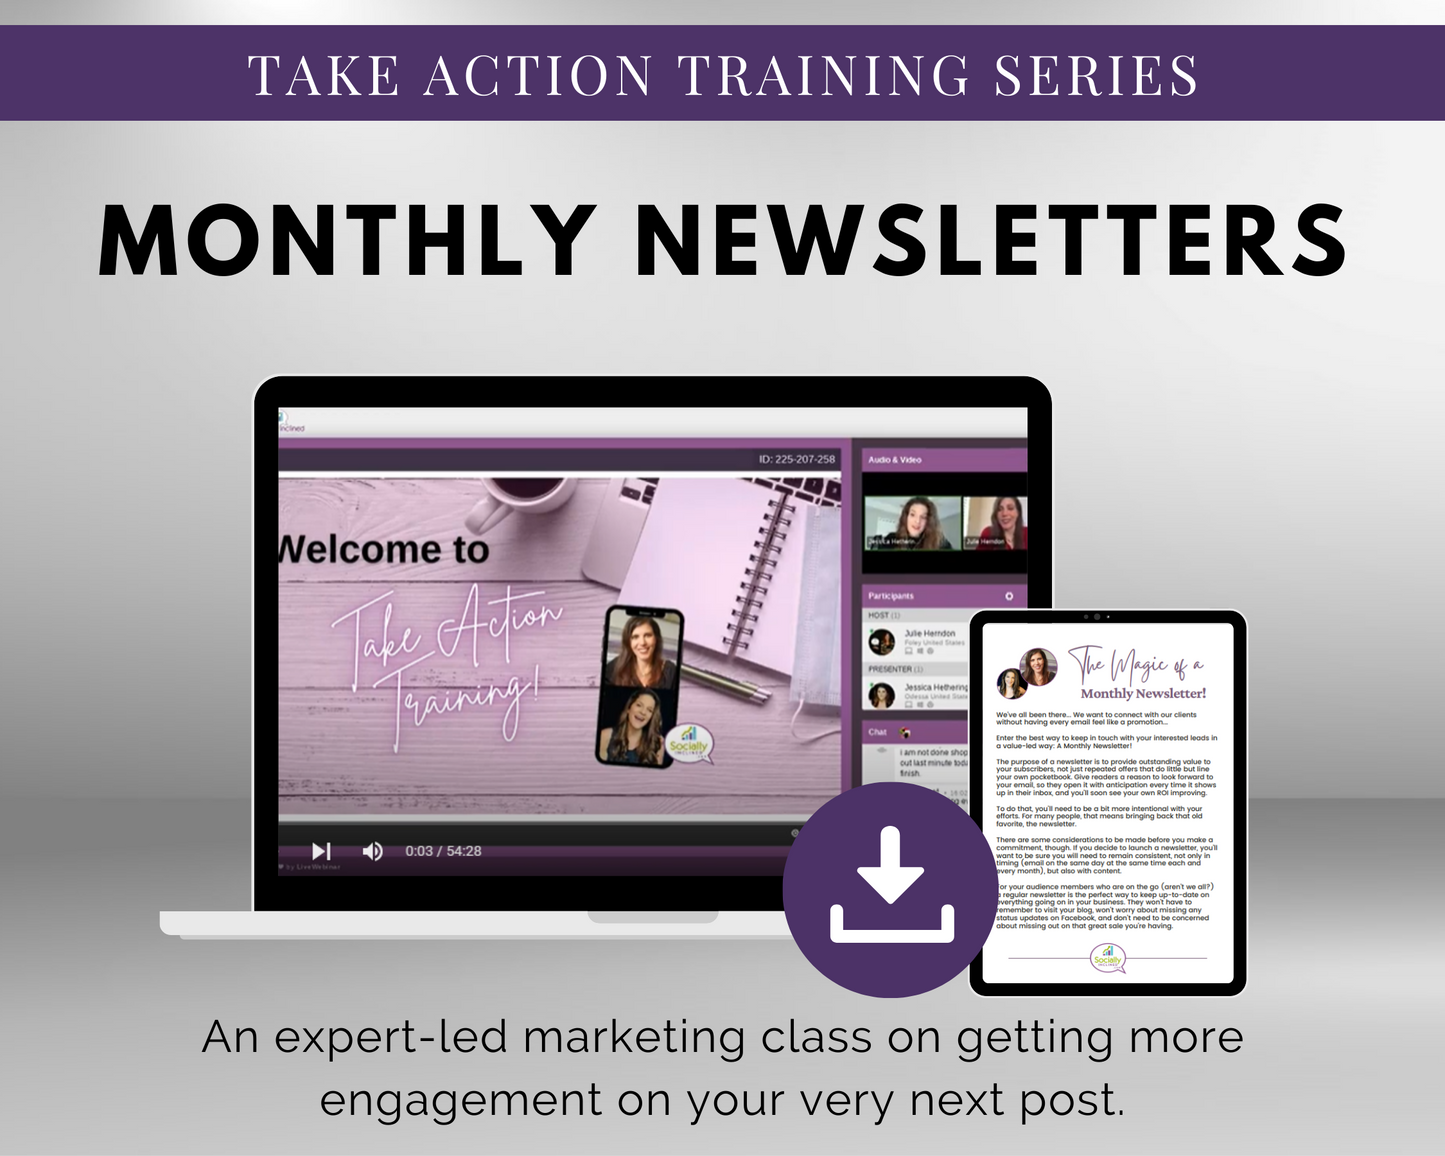 TAT - Monthly Newsletters Masterclass